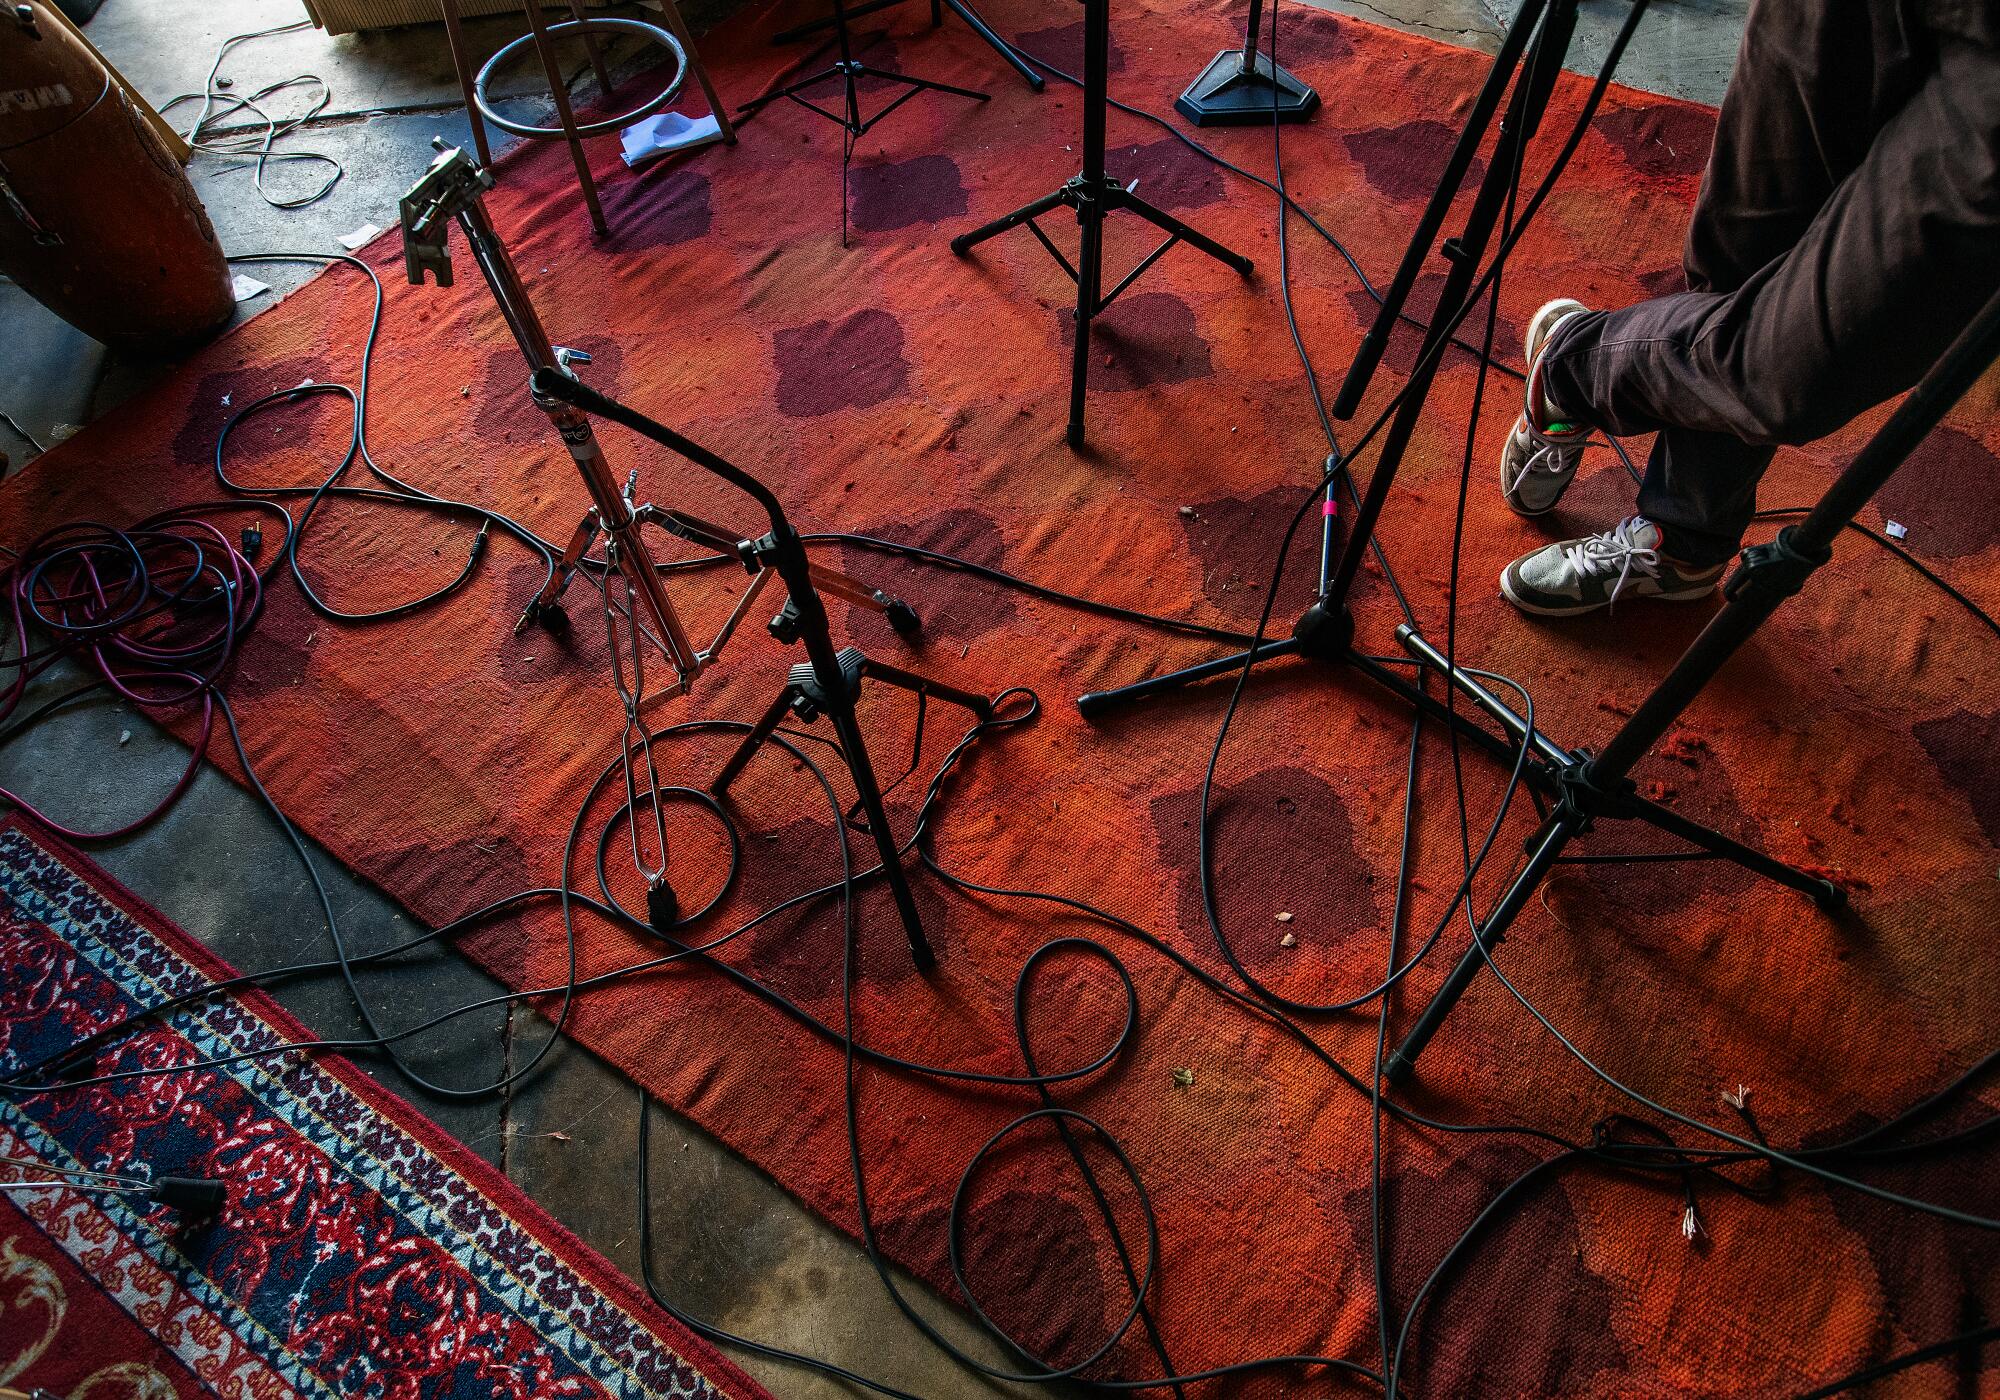 An image of a red carpeted floor, covered in cables and mic stands.